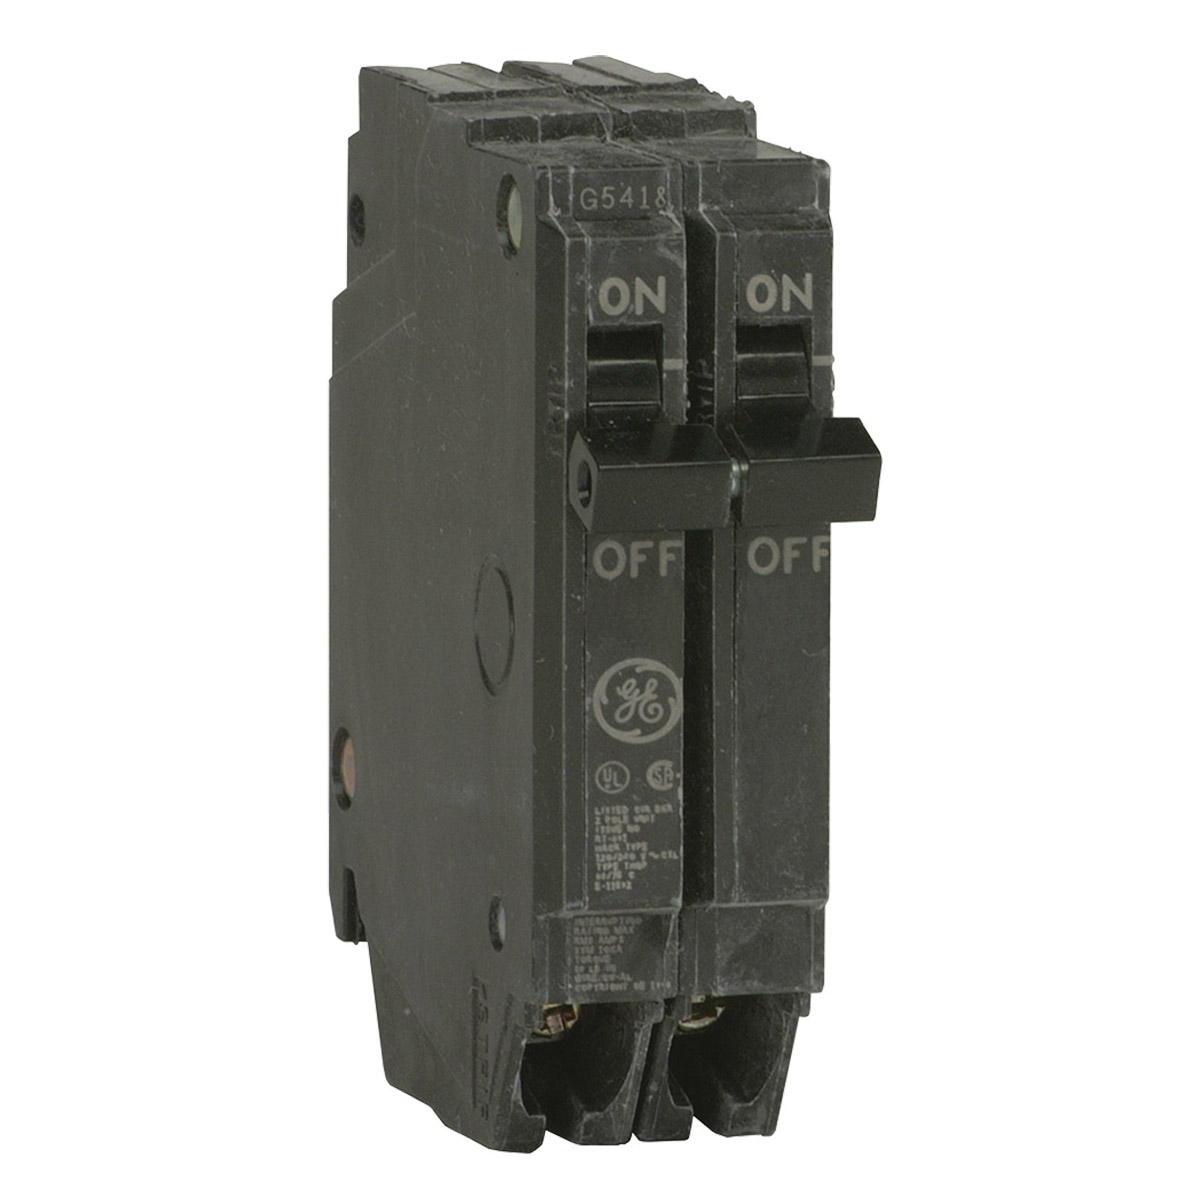 THQP220 Feeder Circuit Breaker, Type THQP, 20 Amp, 2 -Pole, 120/240 V, Plug Mounting